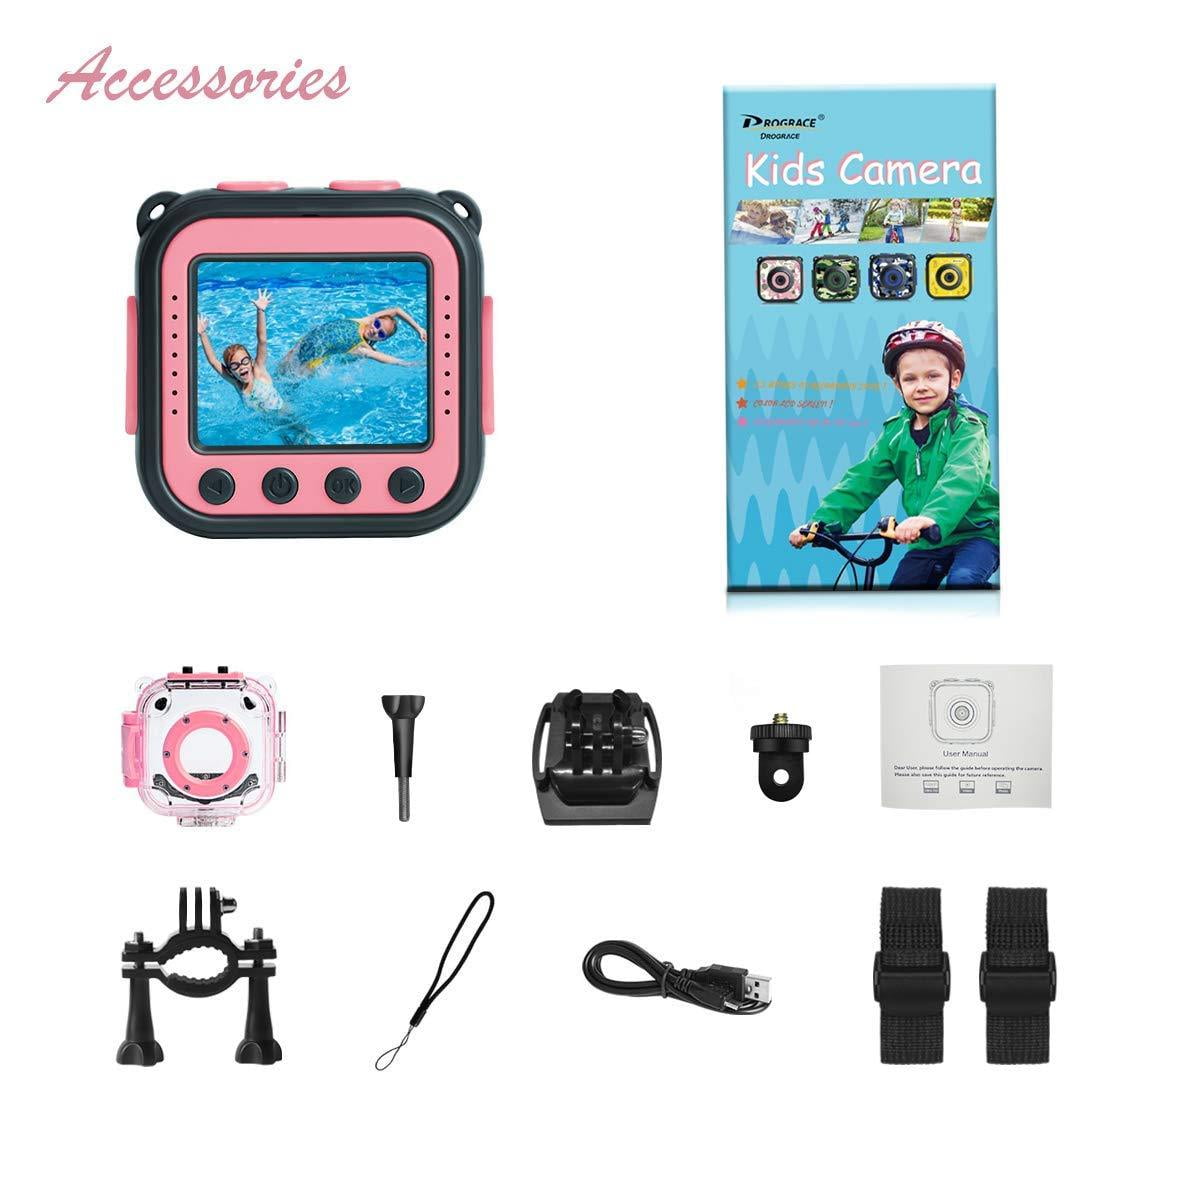 kids action camera pink Upgraded PROGRACE Kids Waterproof Camera Action Video Digital Camera 1080 HD Camcorder for Girls Toys Gifts Build-in Game Pink